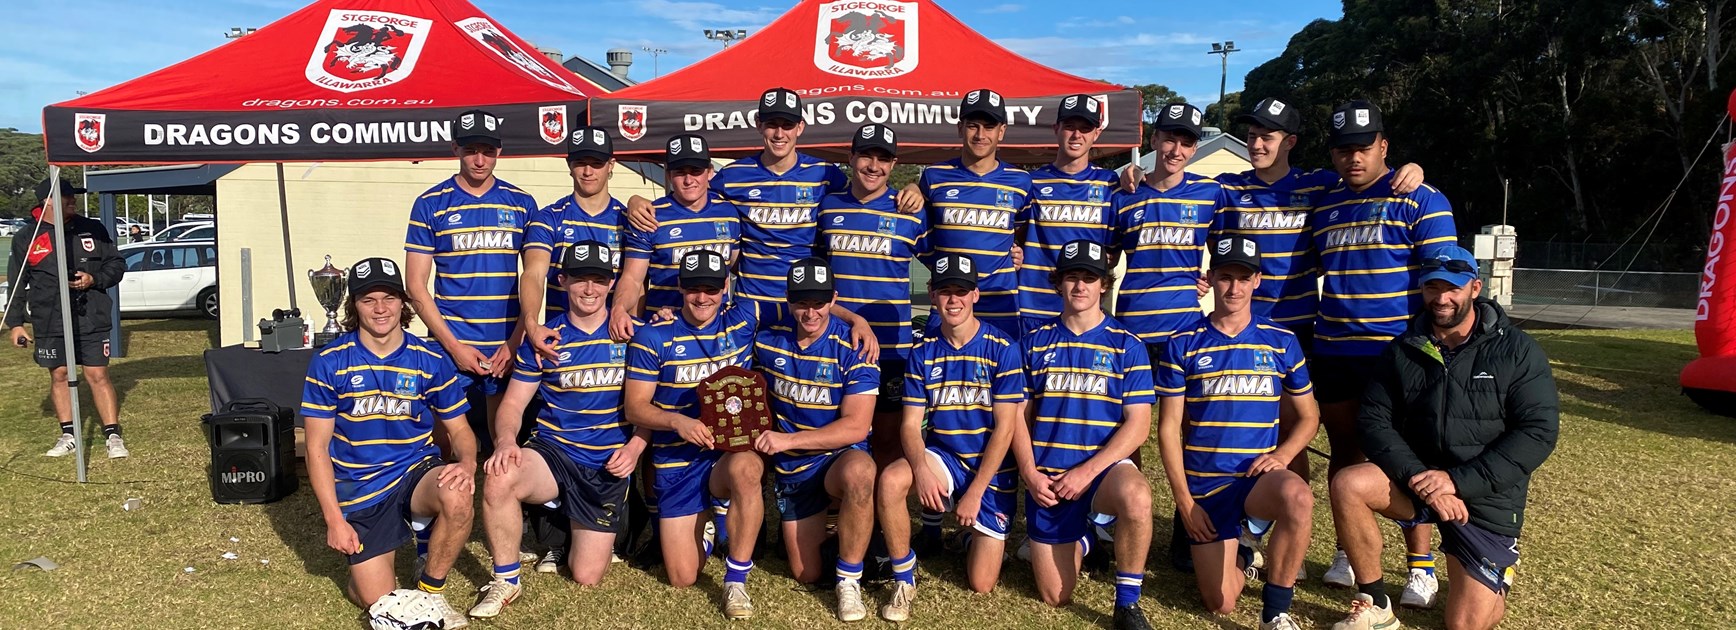 Southern NSW Championship Regional Finals Day